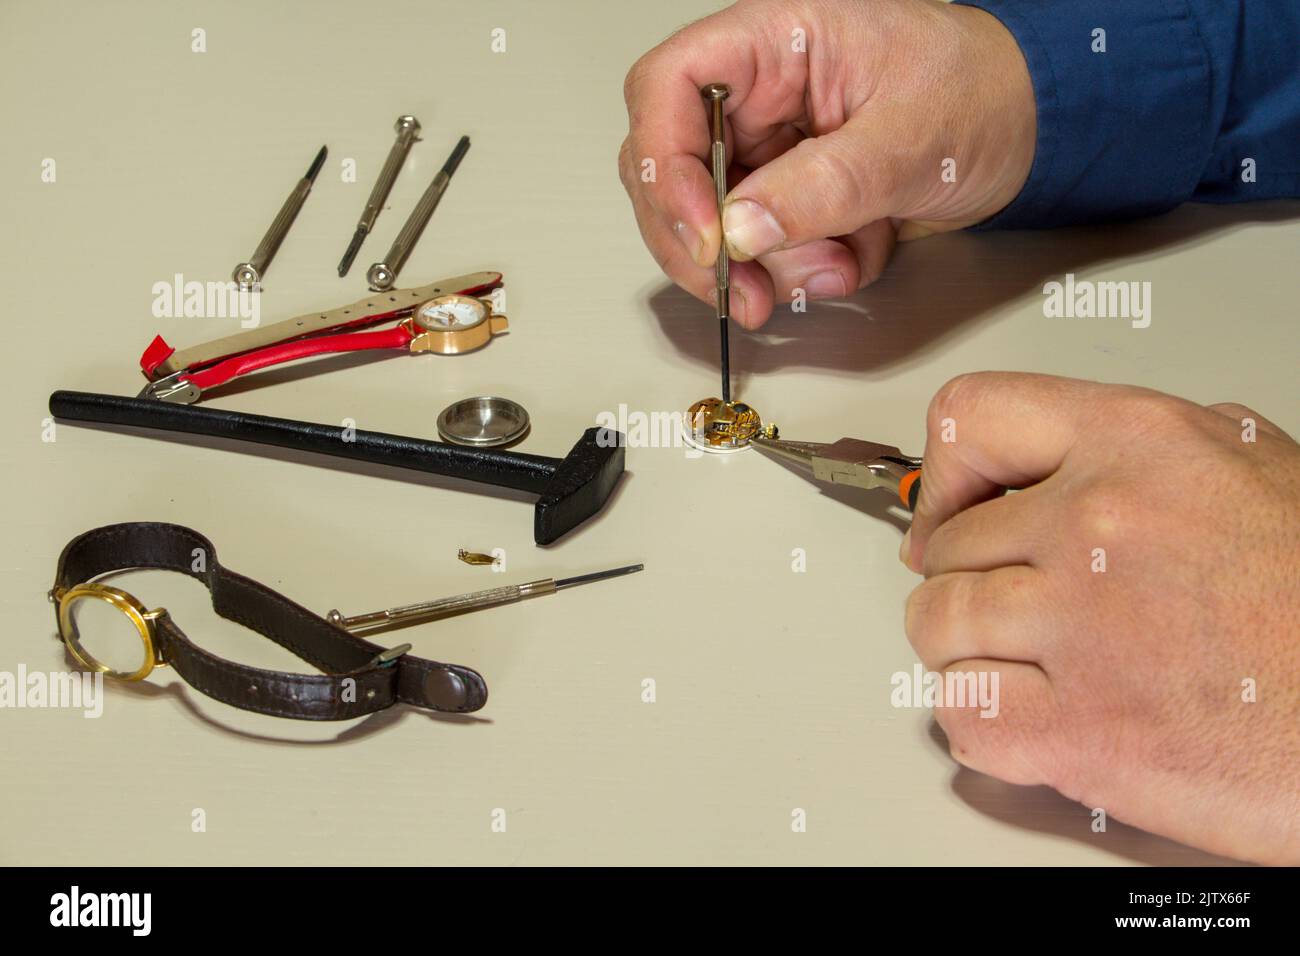 hands of a man while repairing watches. Watchmaker at work Stock Photo